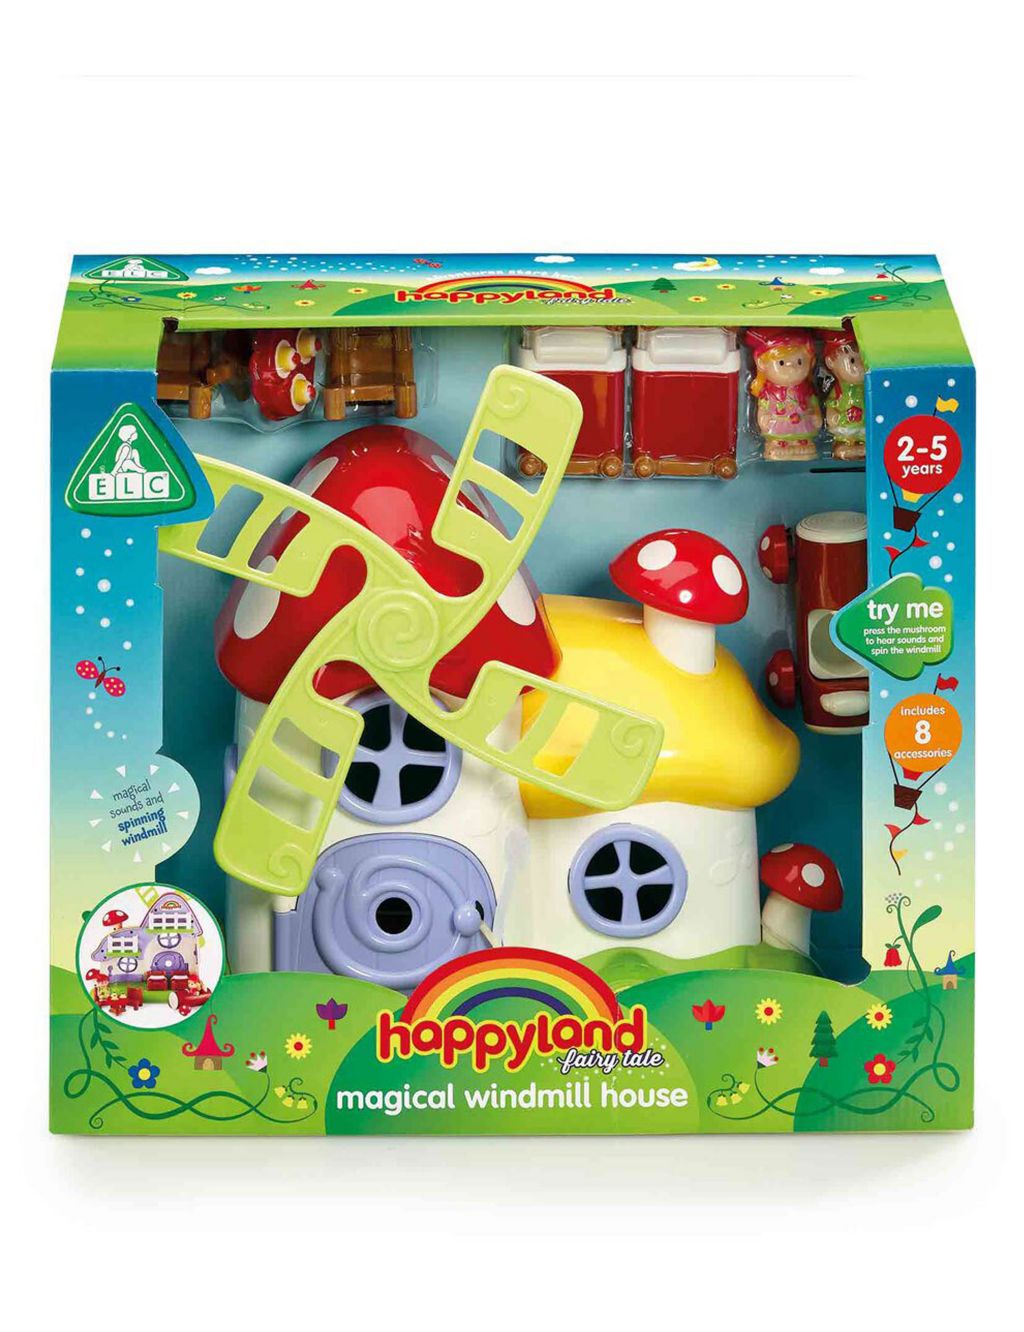 Happyland Fairy Tale Magical Windmill House (2-5 Yrs) image 2